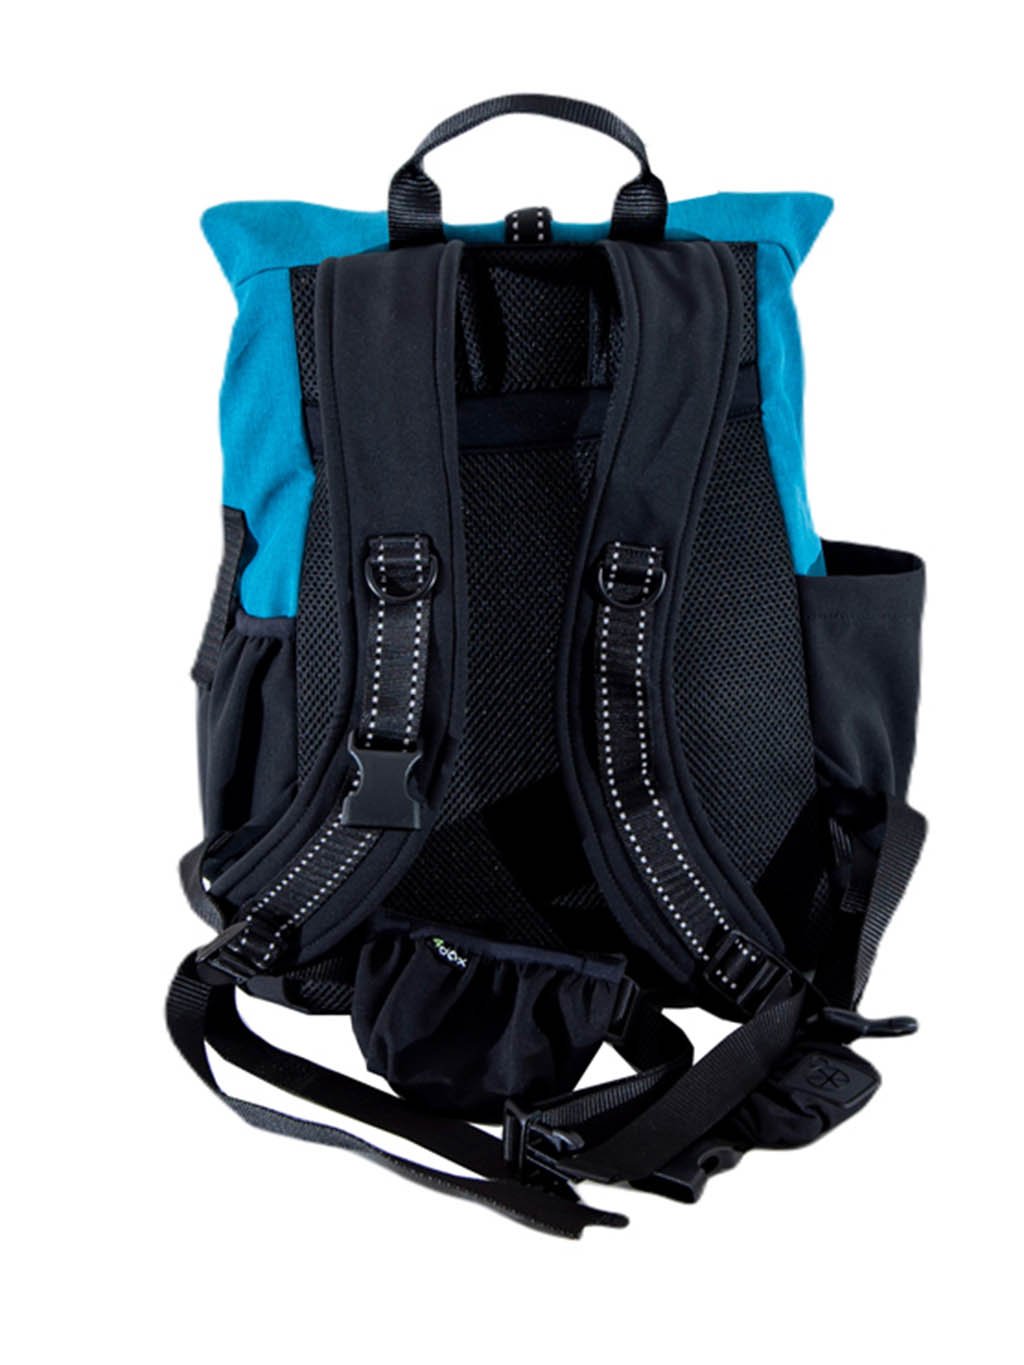 Training backpack Teal with top zip fastening 4dox